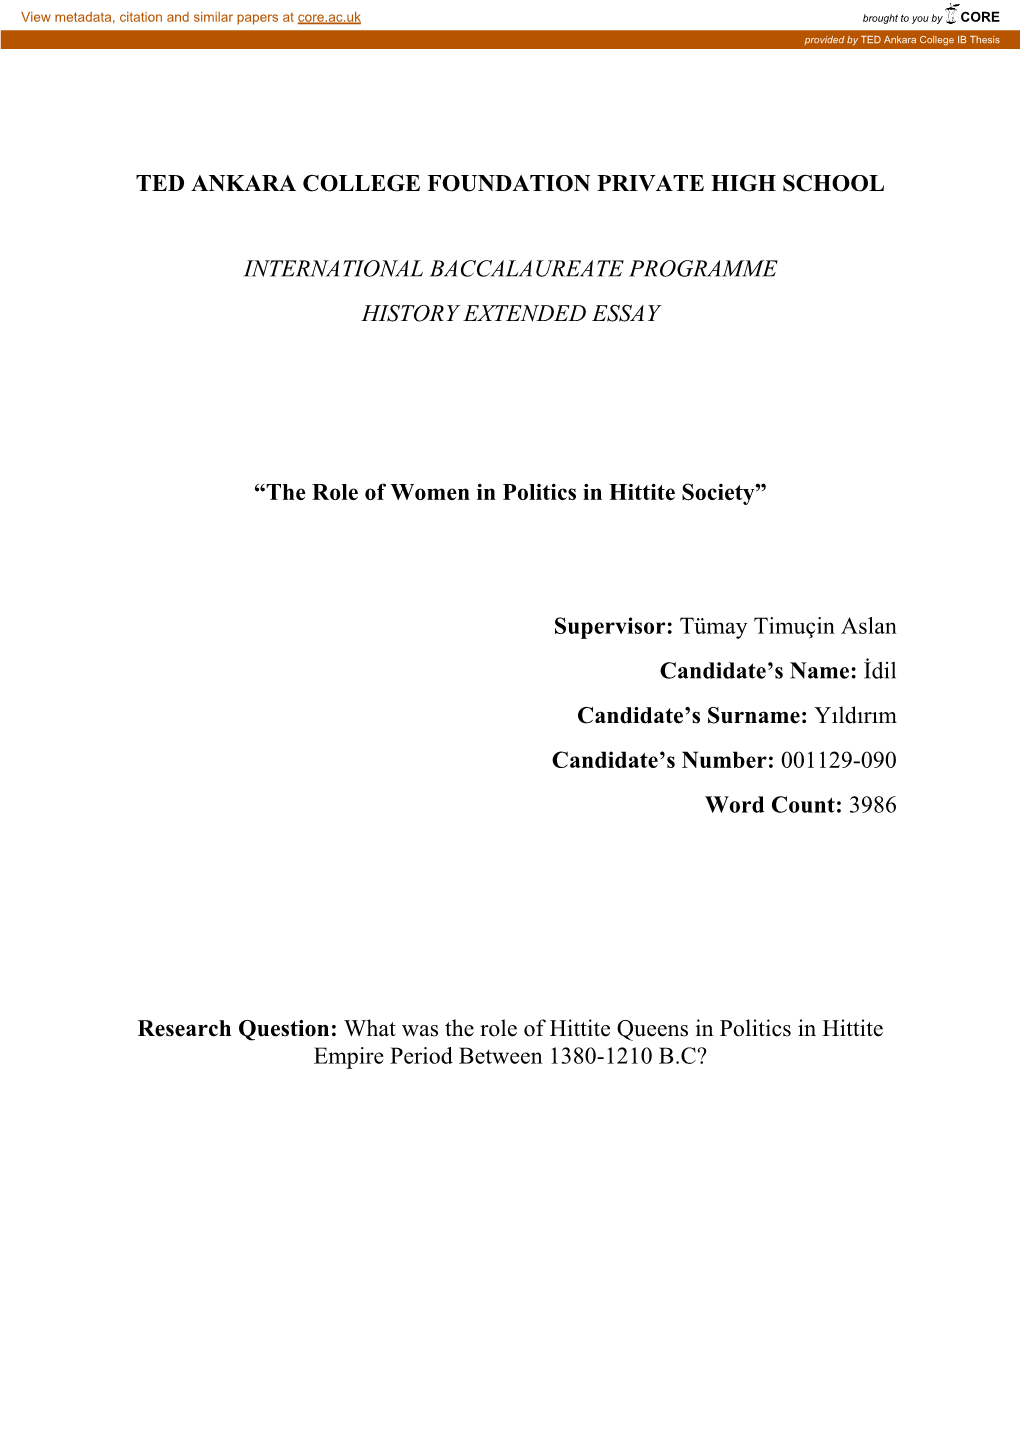 The Role of Women in Politics in Hittite Society”